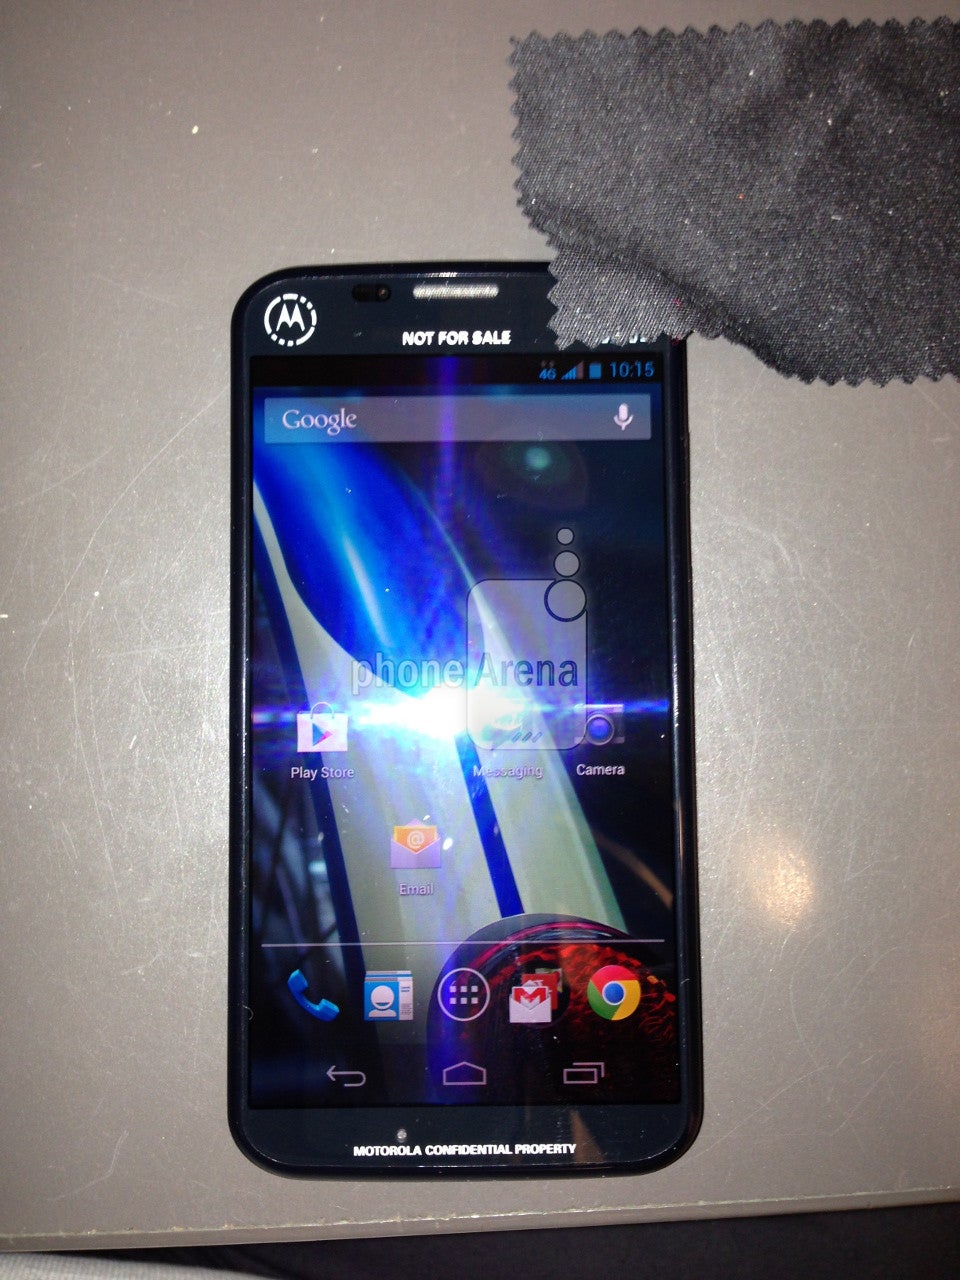 Mysterious Motorola X phone picture pops up, testing as the XT1056 on Sprint's LTE